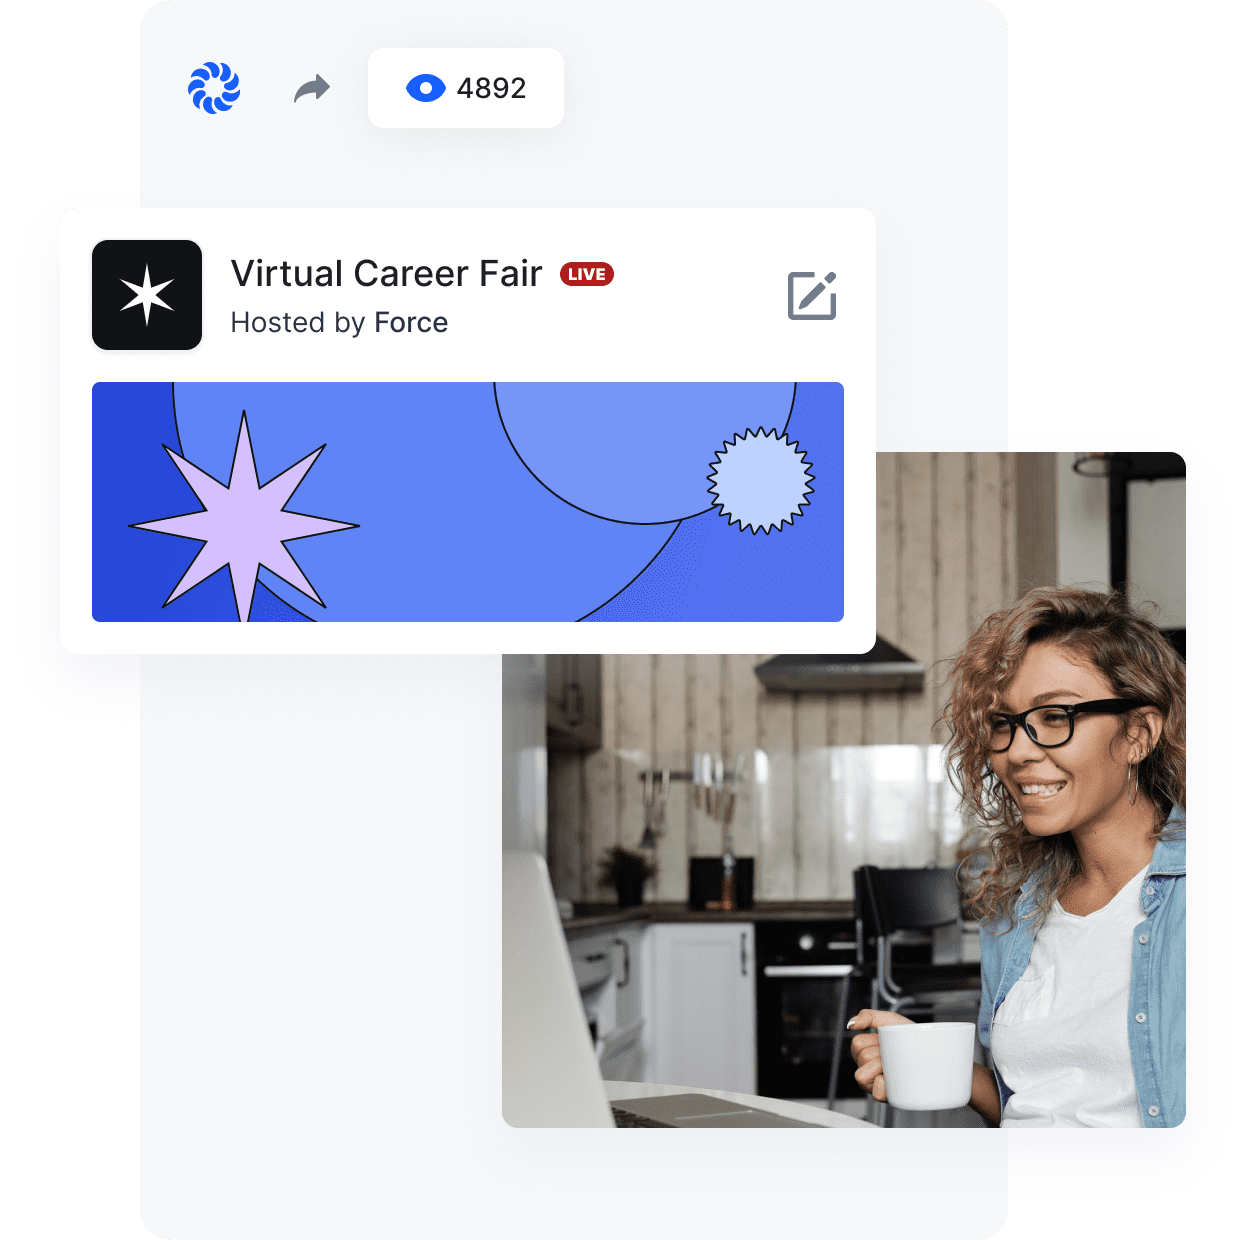 Woman wearing glasses holding mug attending virtual career fair event from the comfort of her home